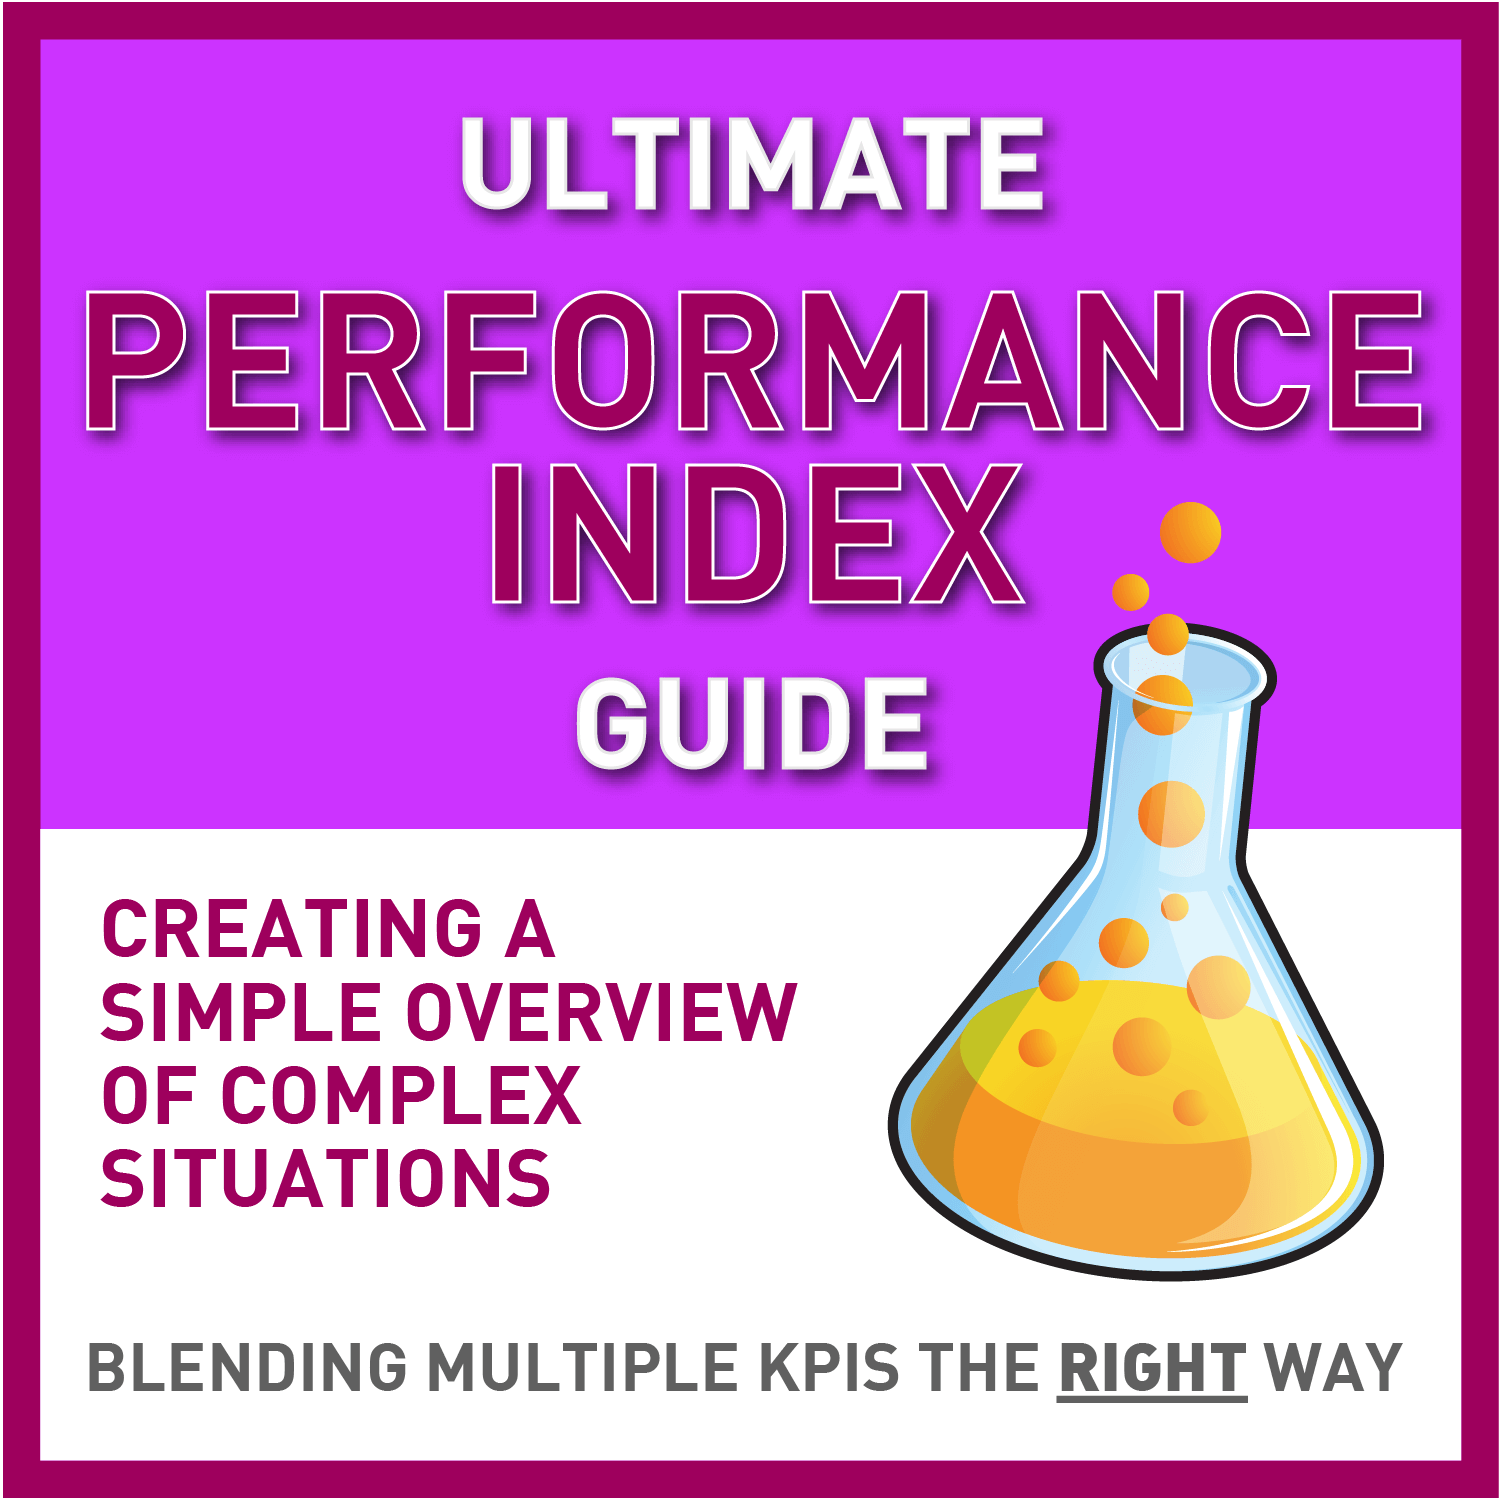 Ultimate Performance Index Guide